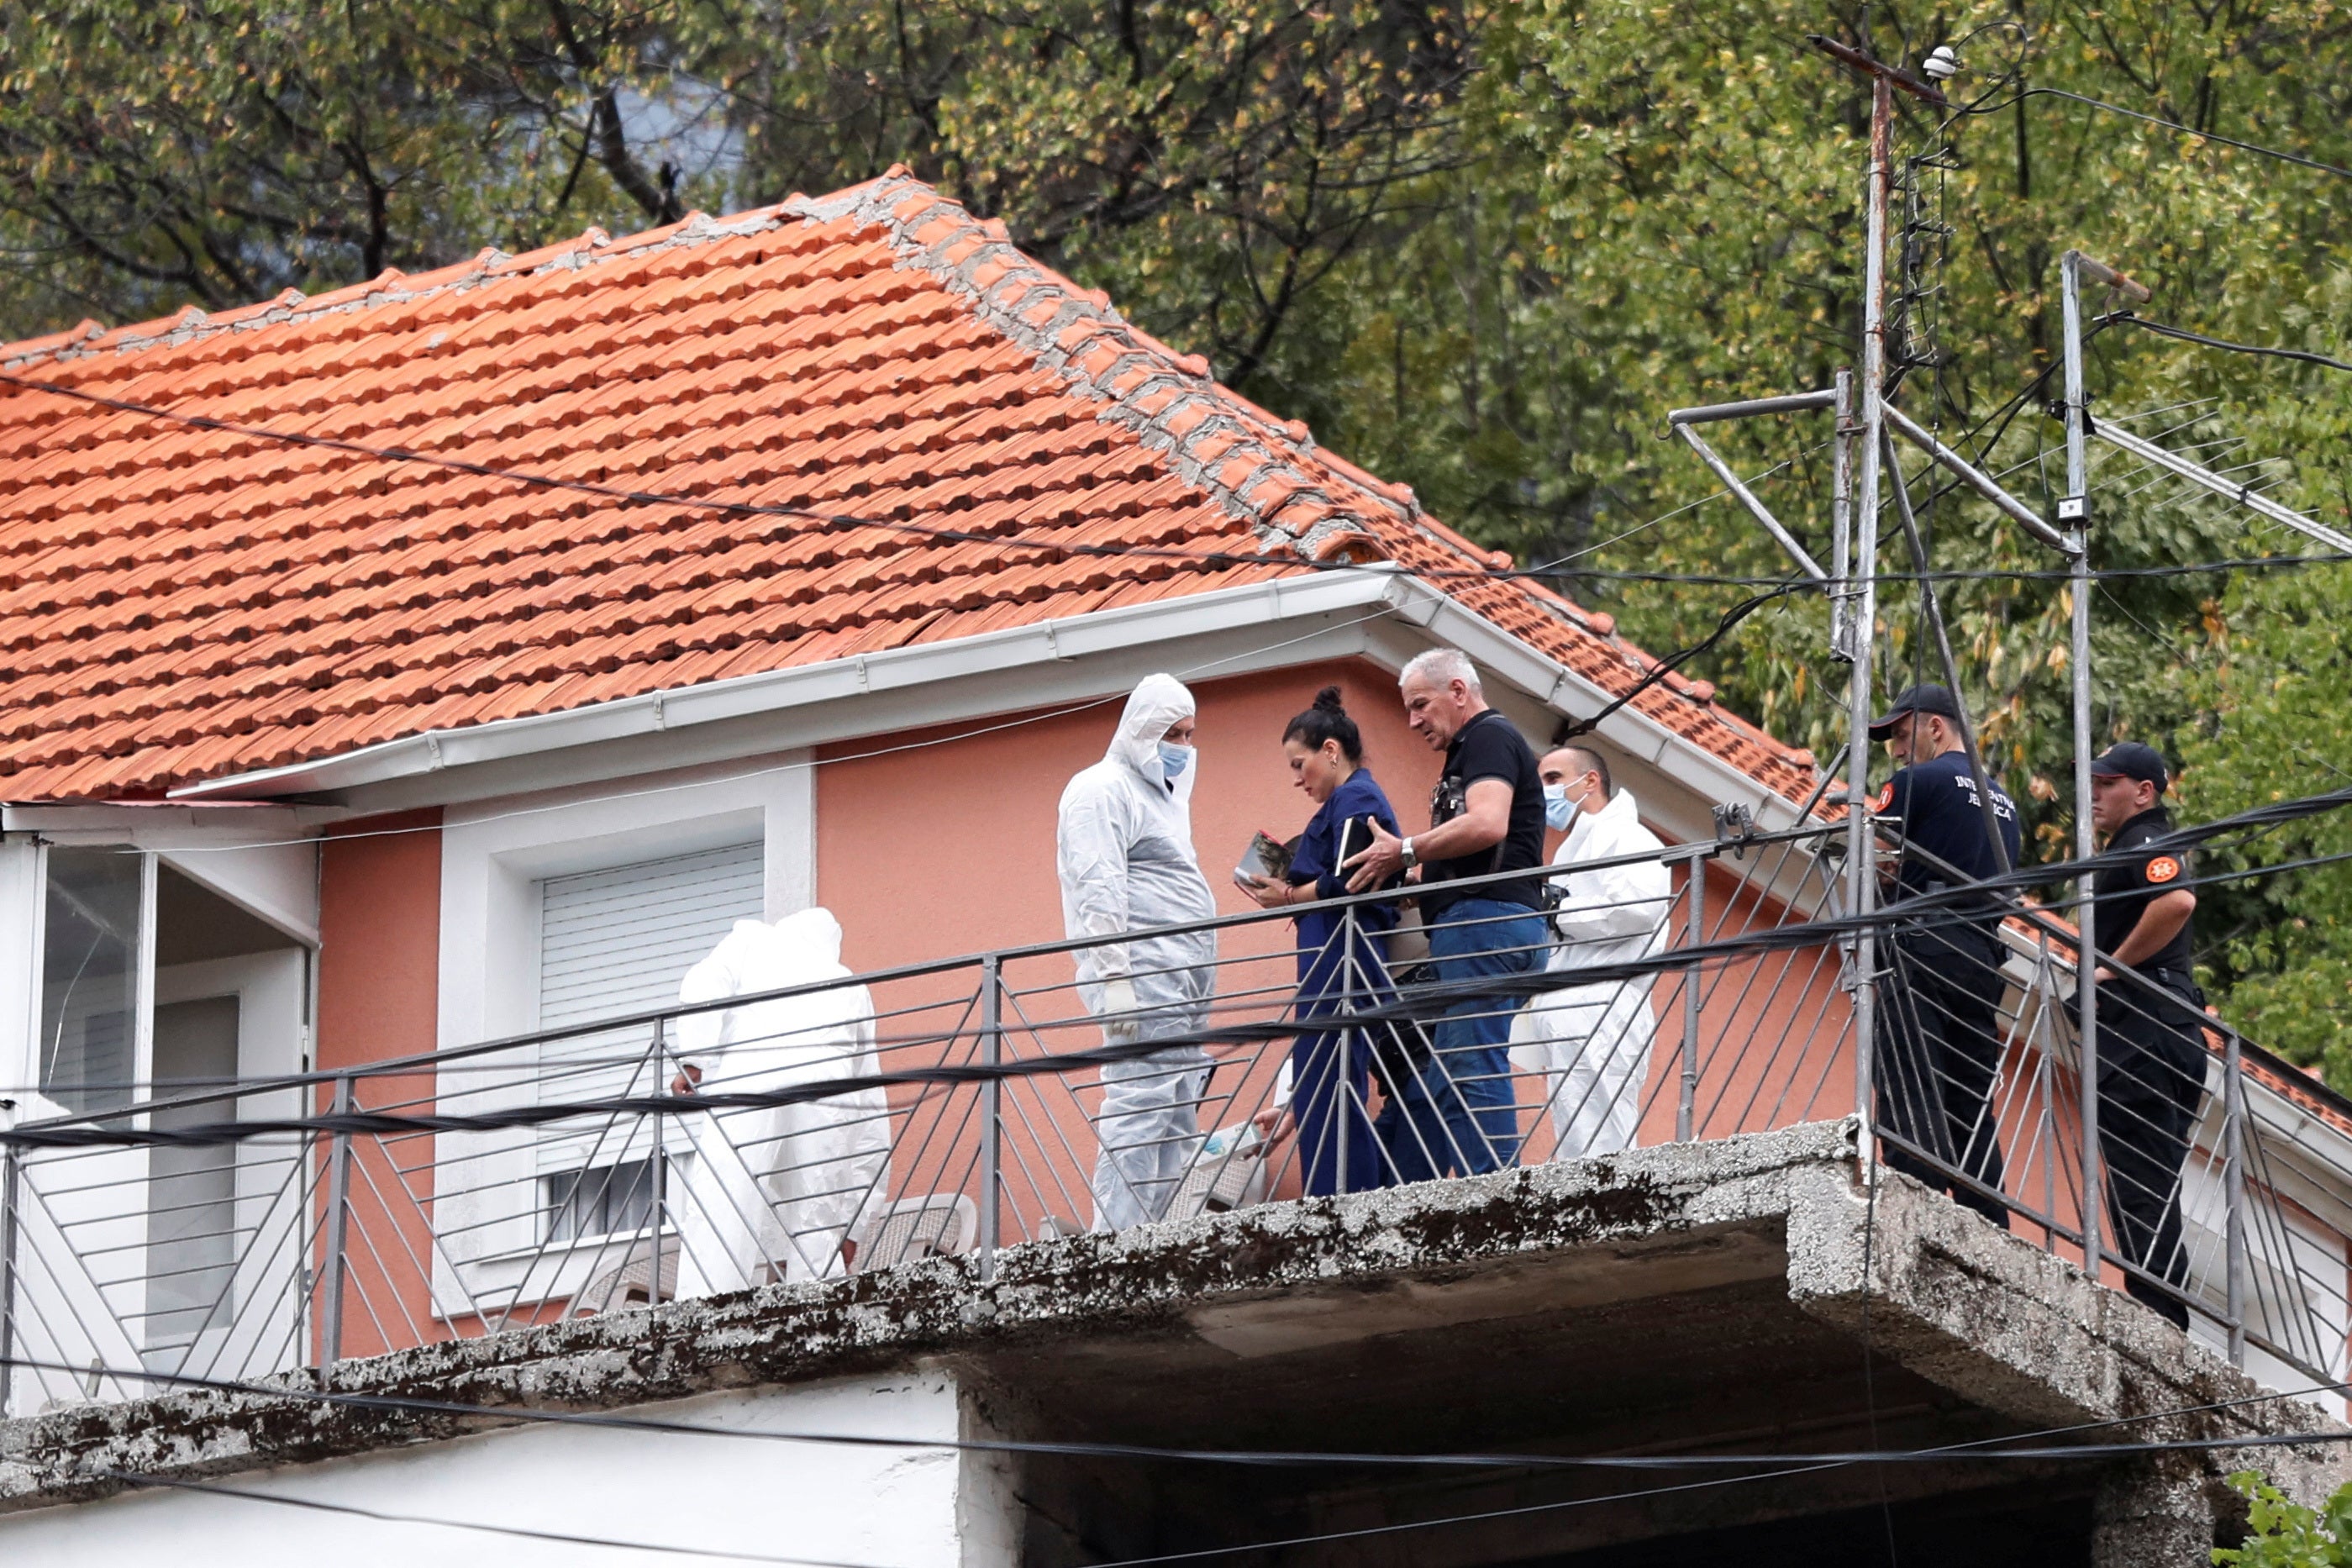 The shooting took place in Cetinje’s, Medovina neighbourhood near the seat of the former royal government